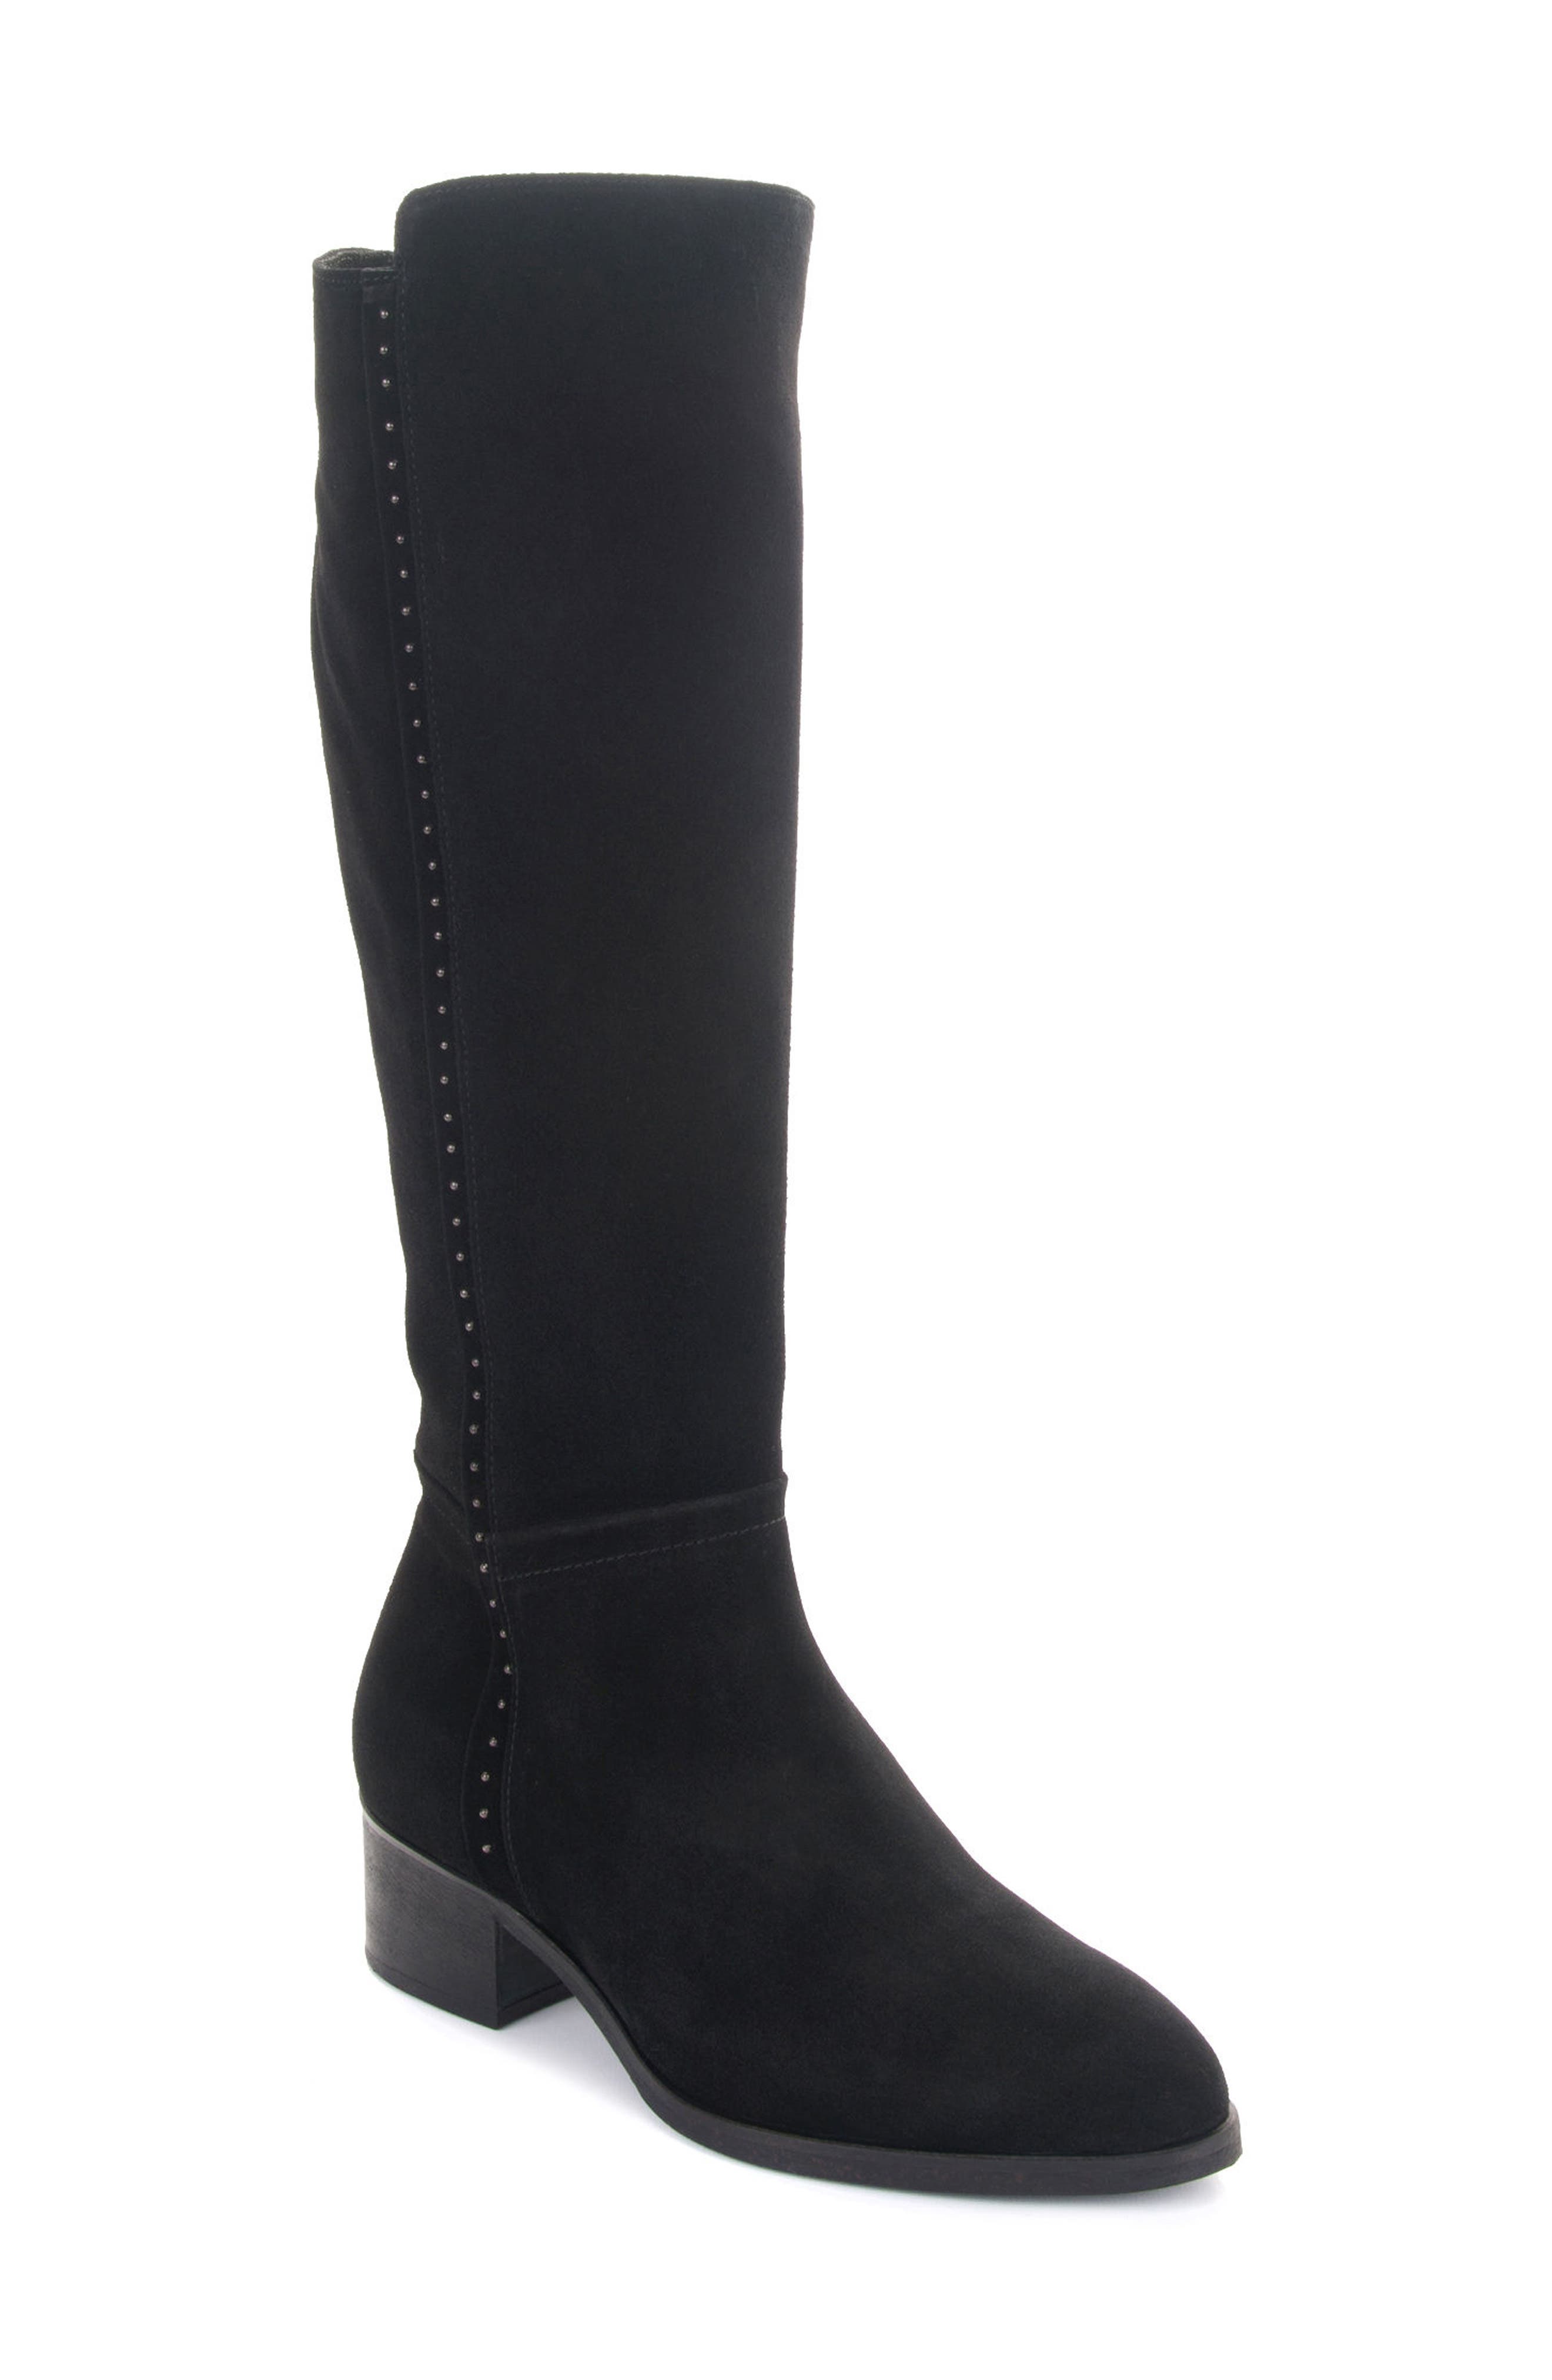 water resistant knee high boots